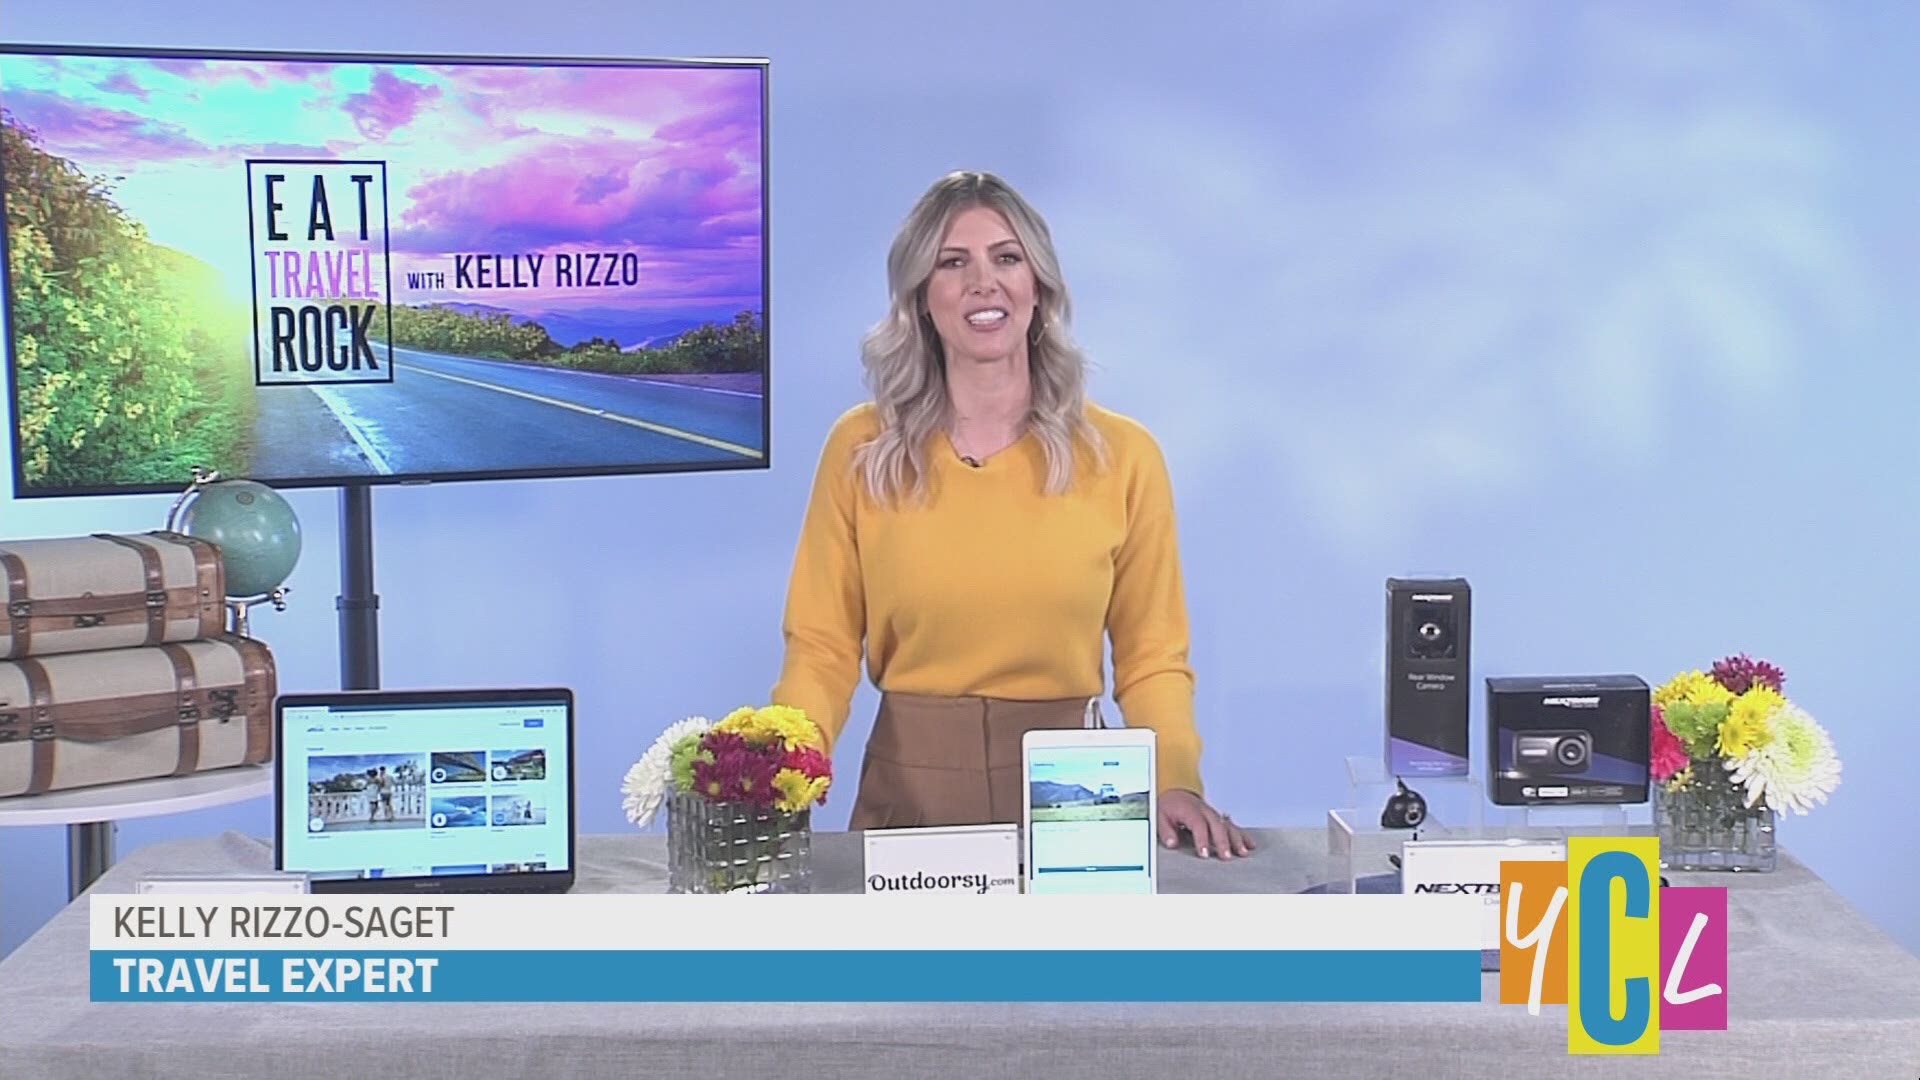 It’s time to rock your next vacation, with tips from travel expert, Kelly Rizzo-Saget from ‘Eat Travel Rock’ TV. This segment was paid for by Affirm and Nextbase.